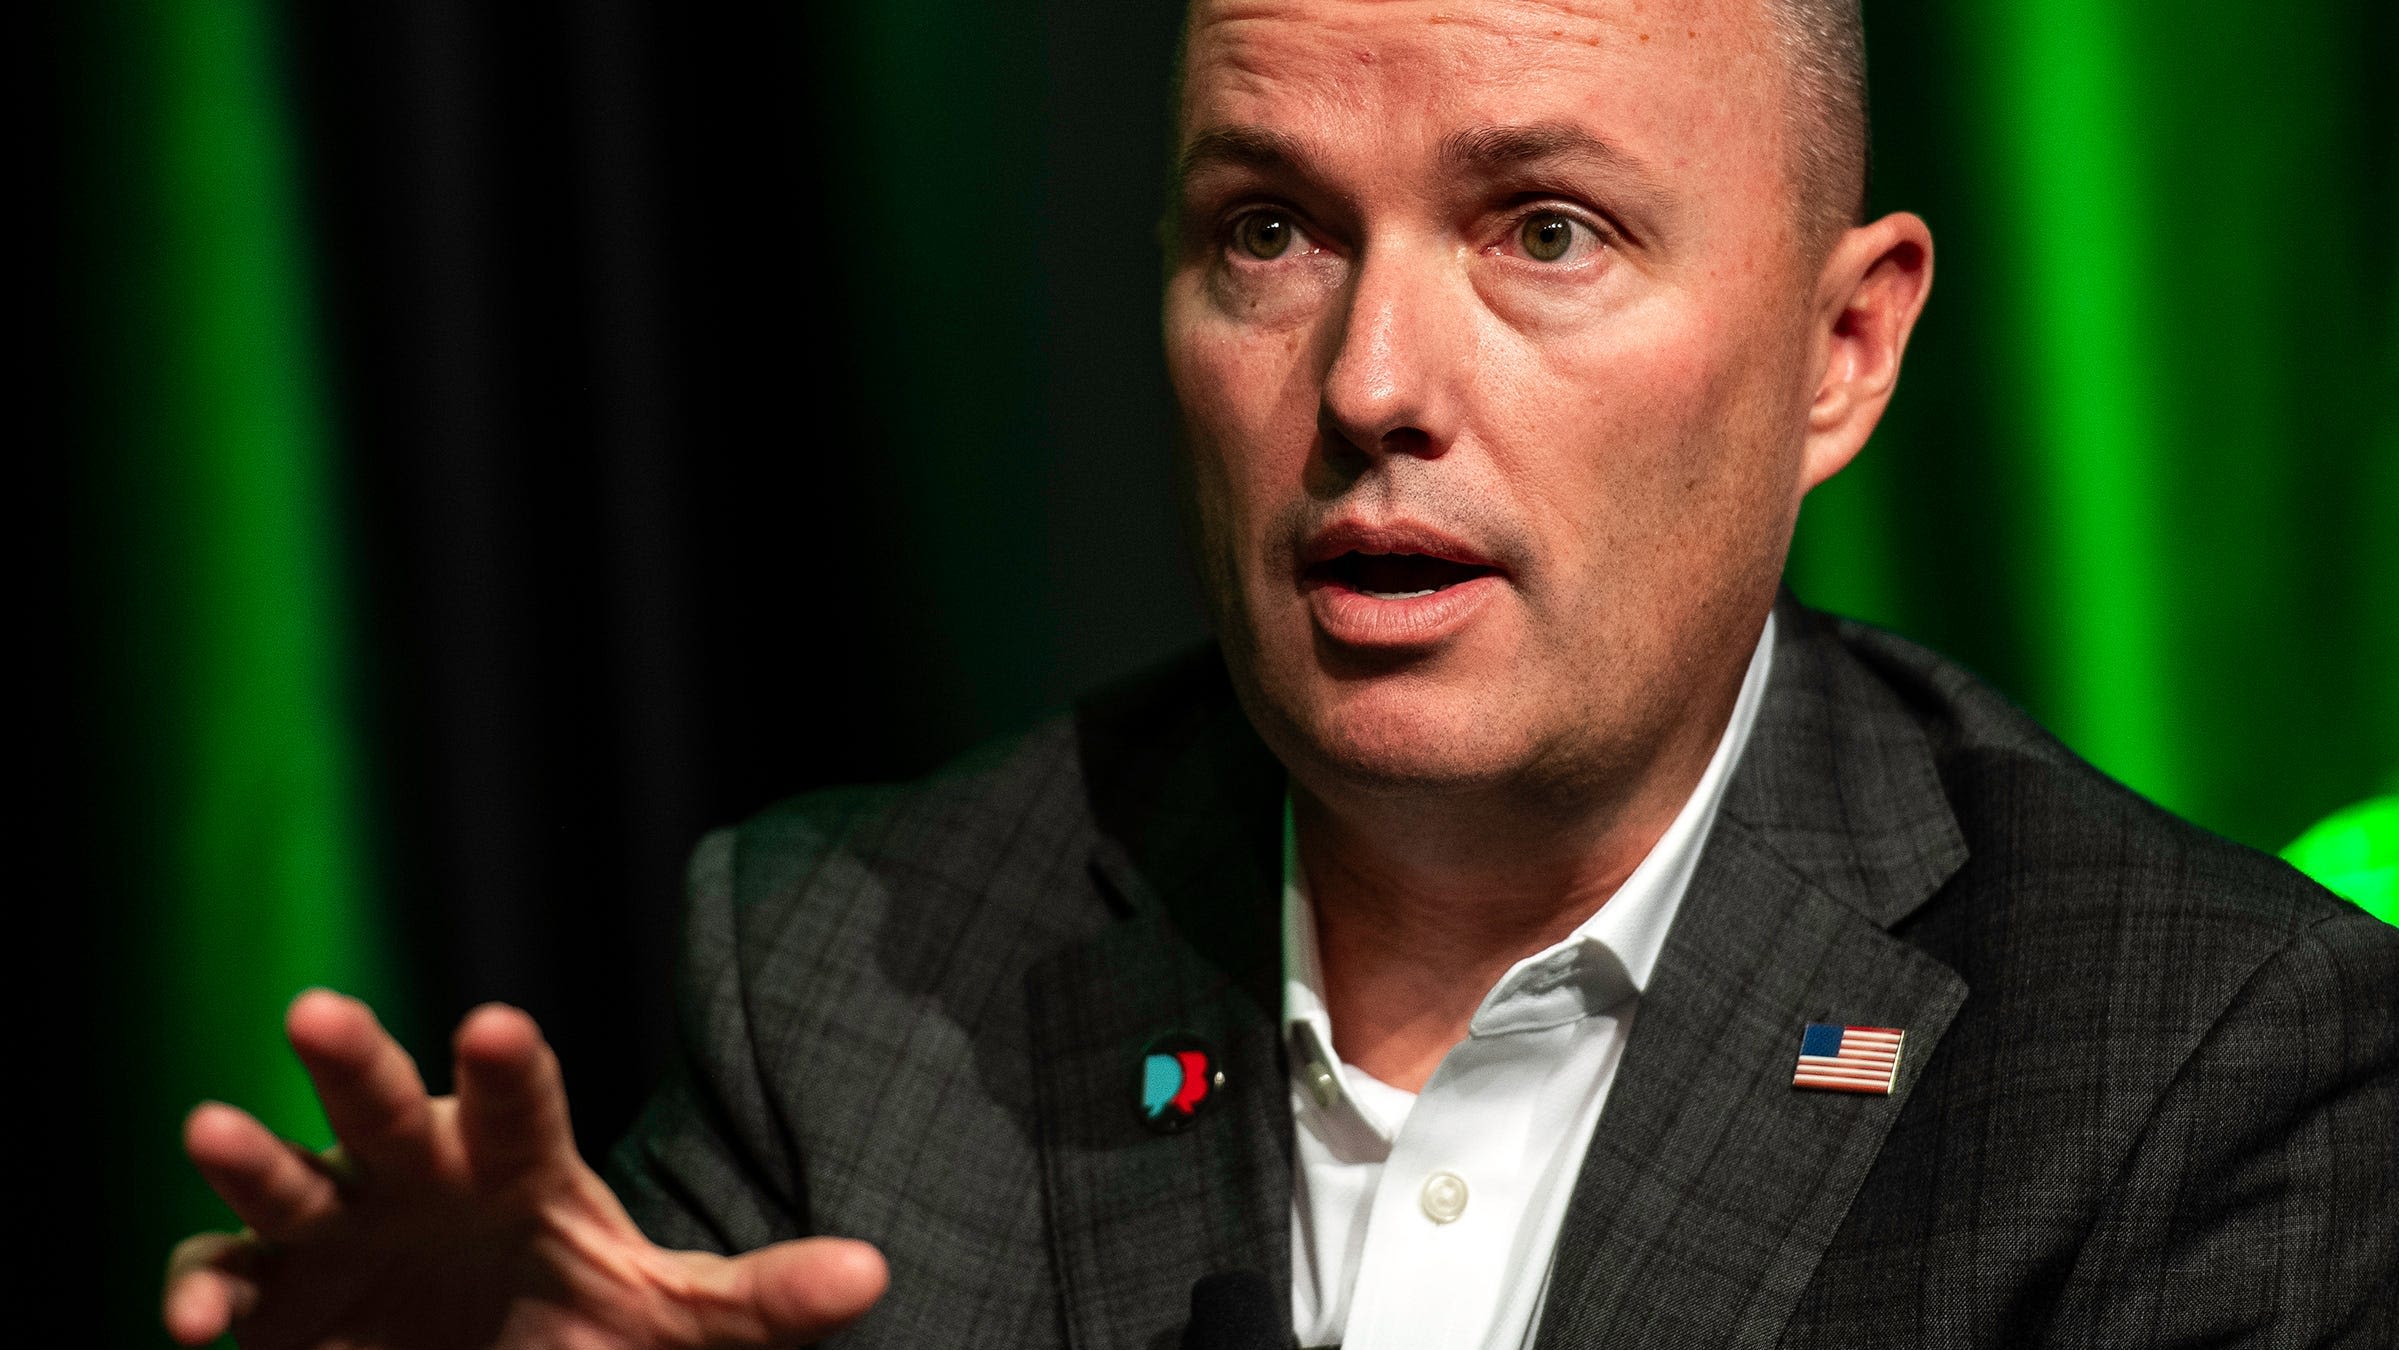 Utah Gov. Spencer Cox, a Trump critic, will support him after assassination attempt